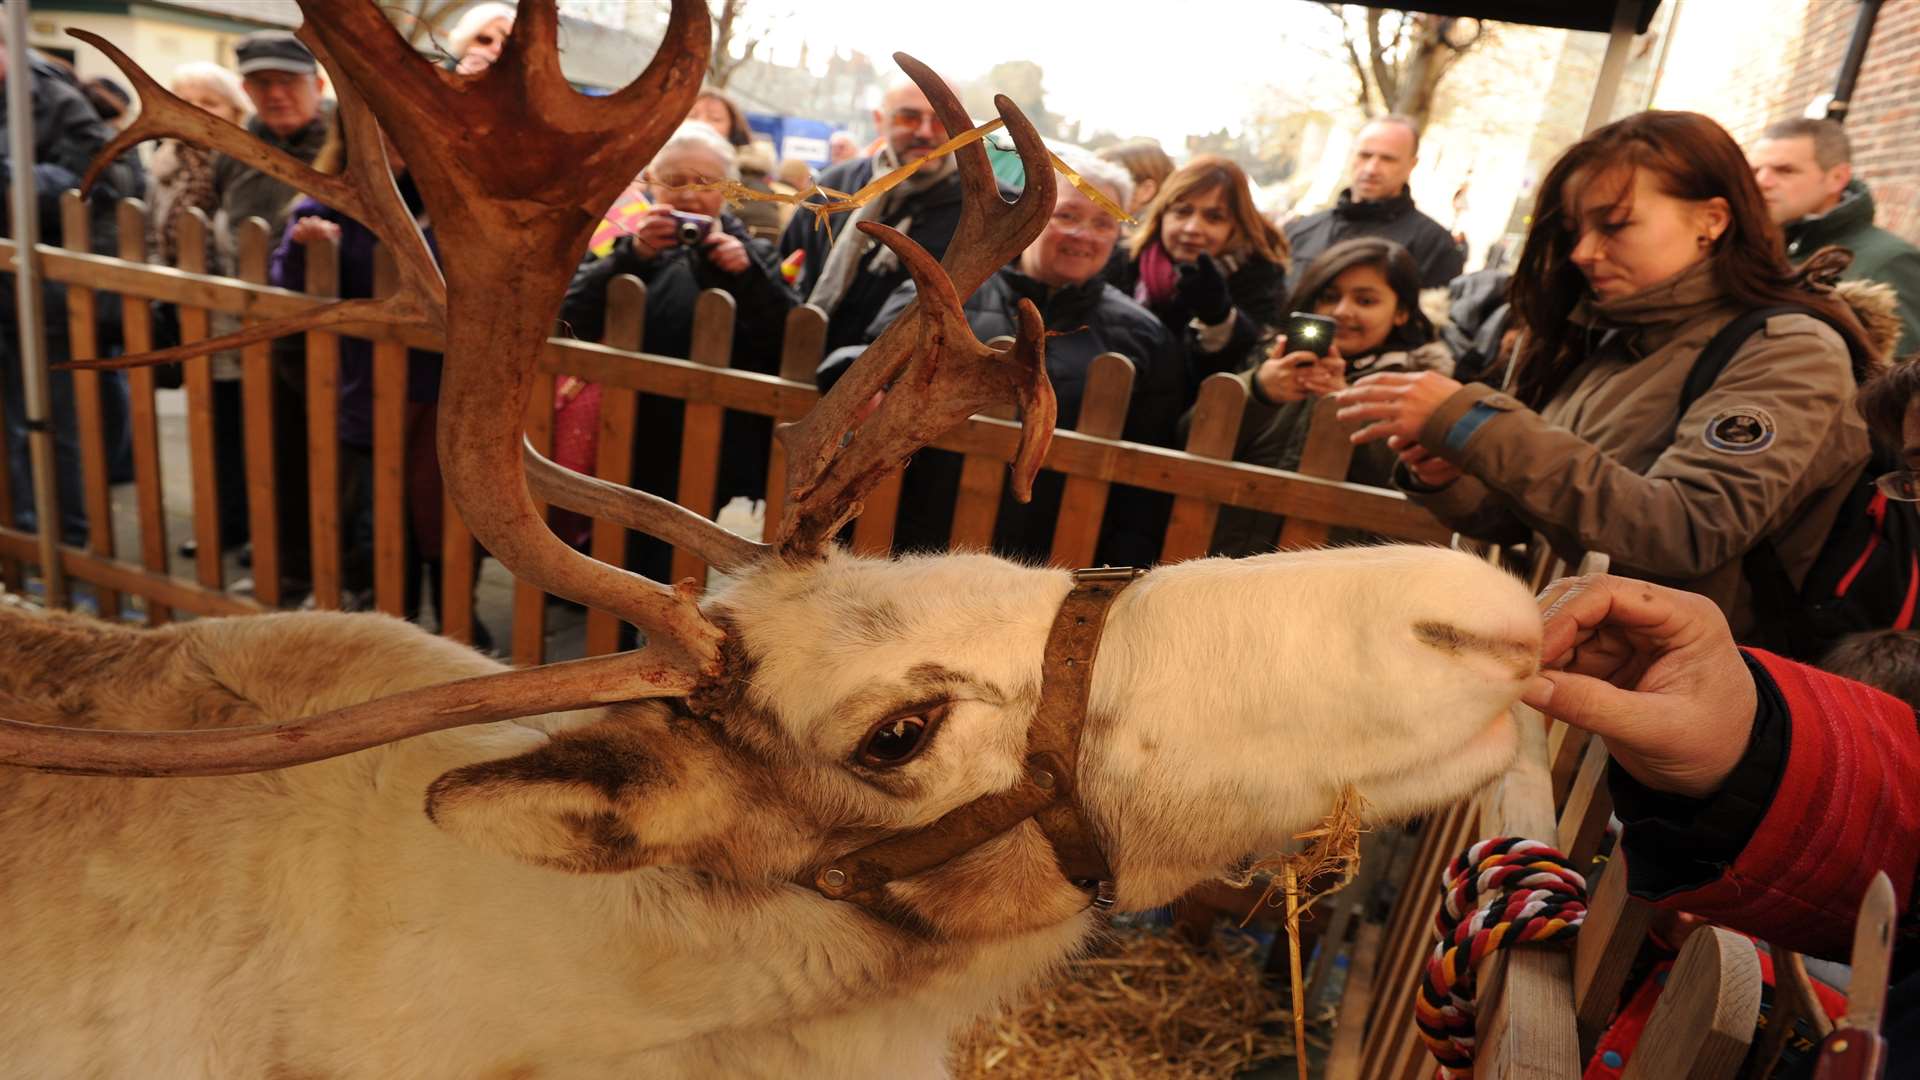 There will be reindeer, like Precious, pictured last year